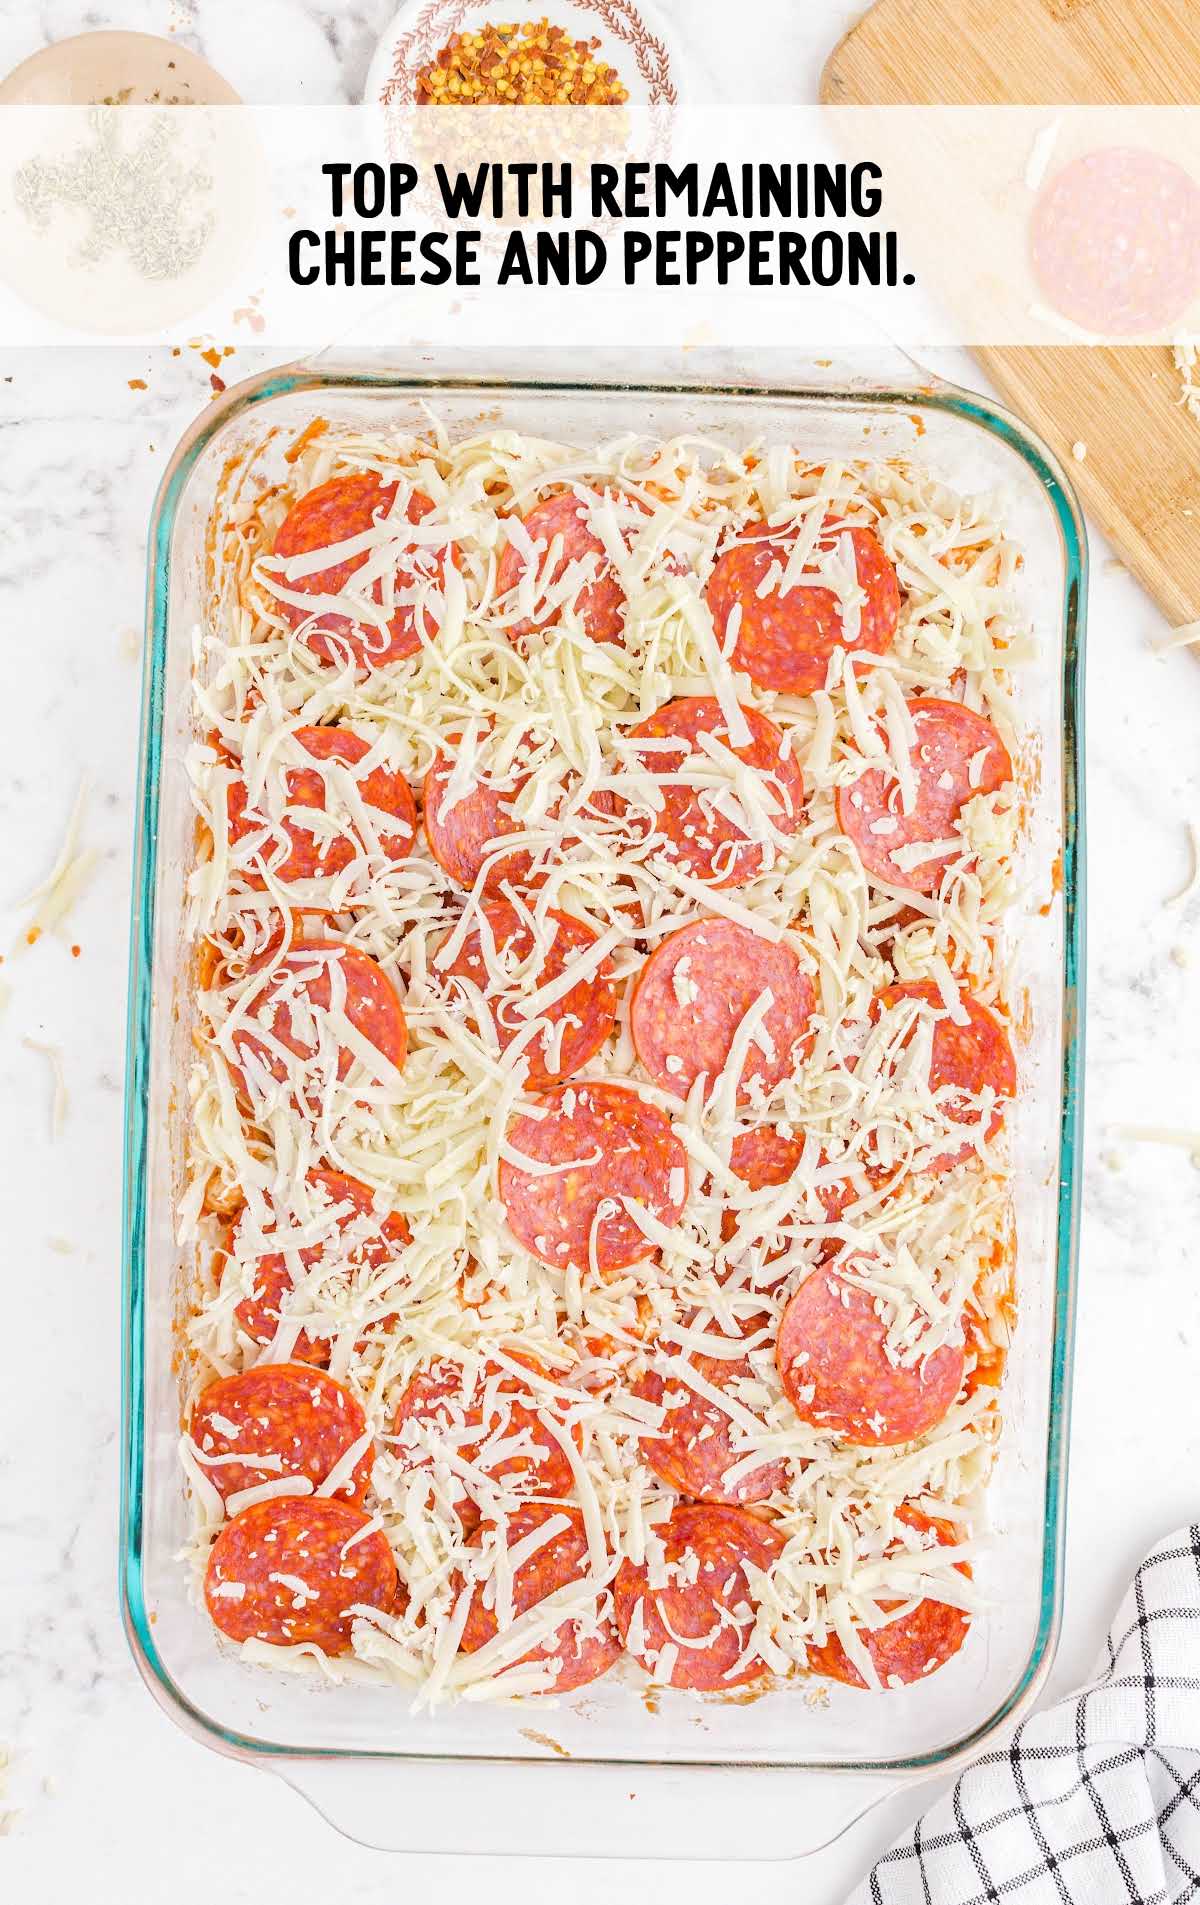 pizza topped with shredded cheese and pepperoni slices in a baking dish